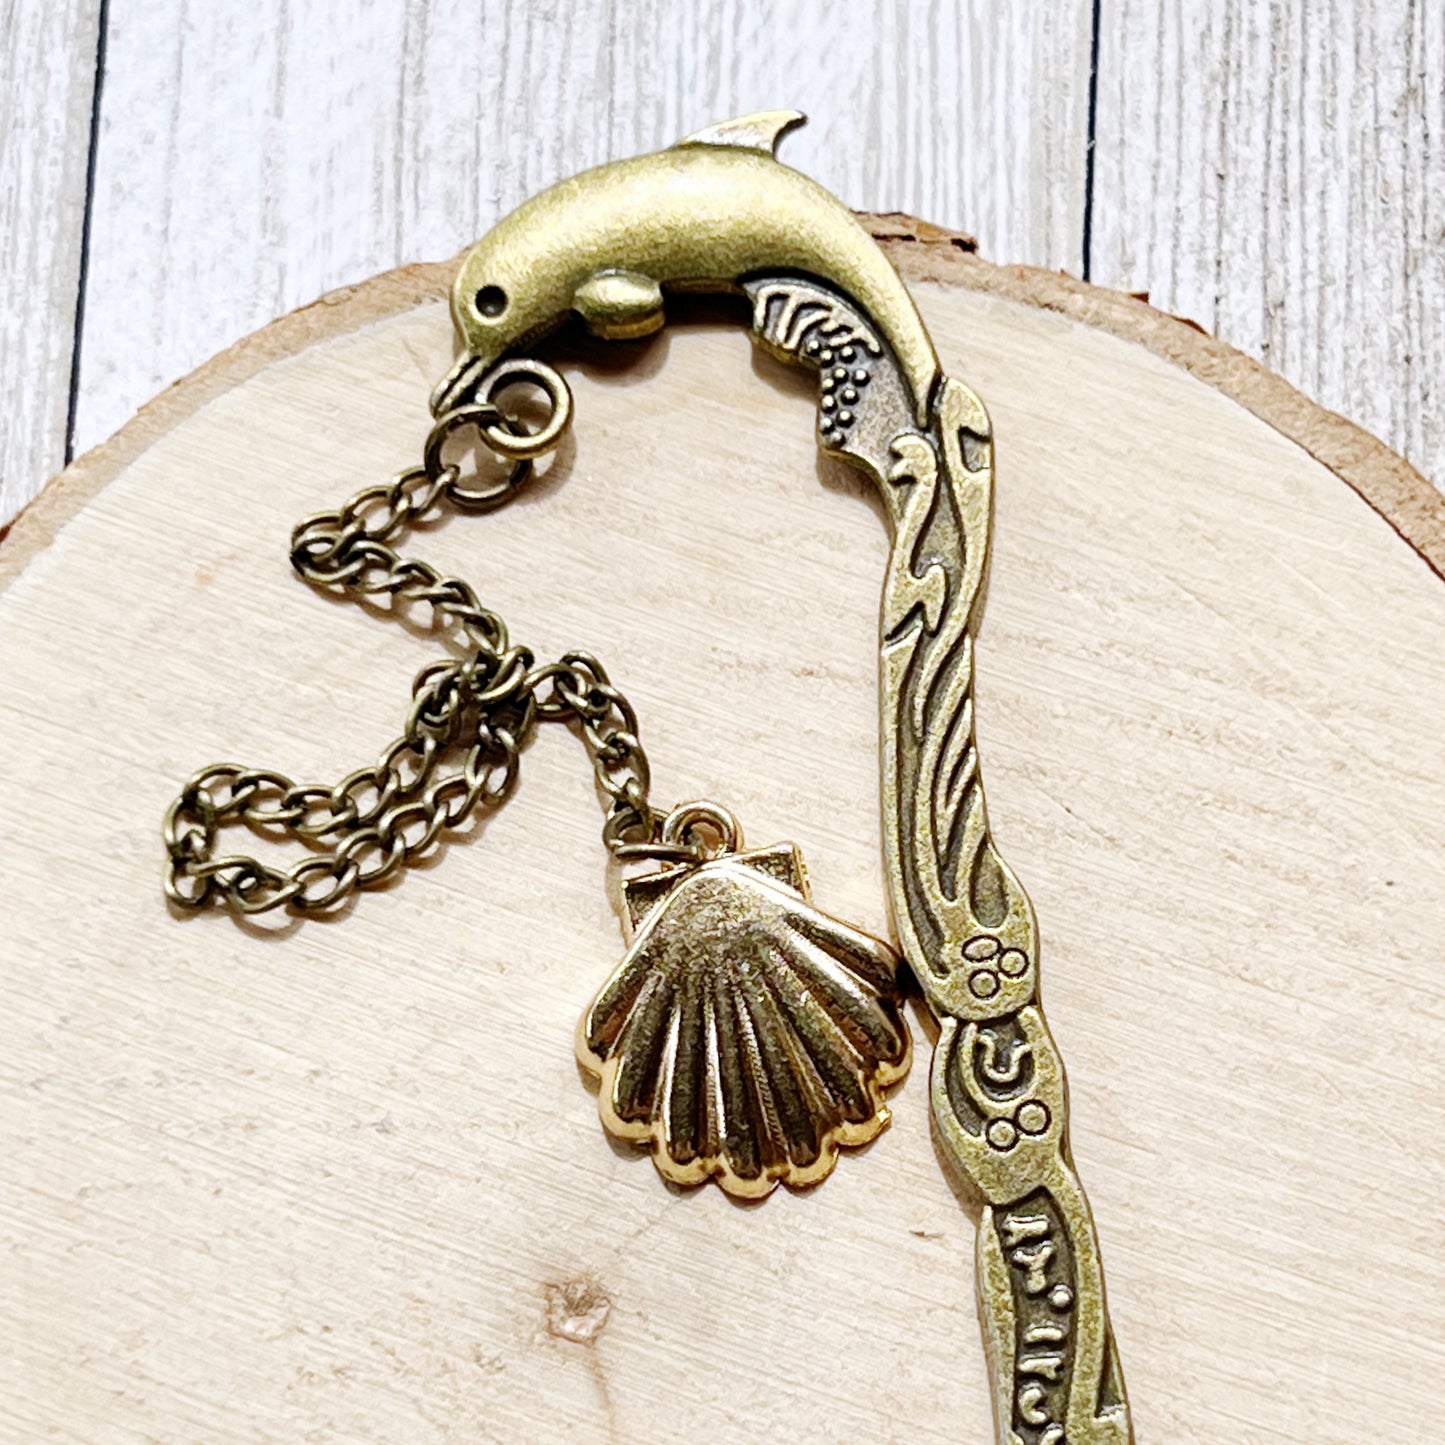 Metal Dolphin Bookmark with Seashell Dangle Chain Charm - Coastal-Inspired Reading Accessory